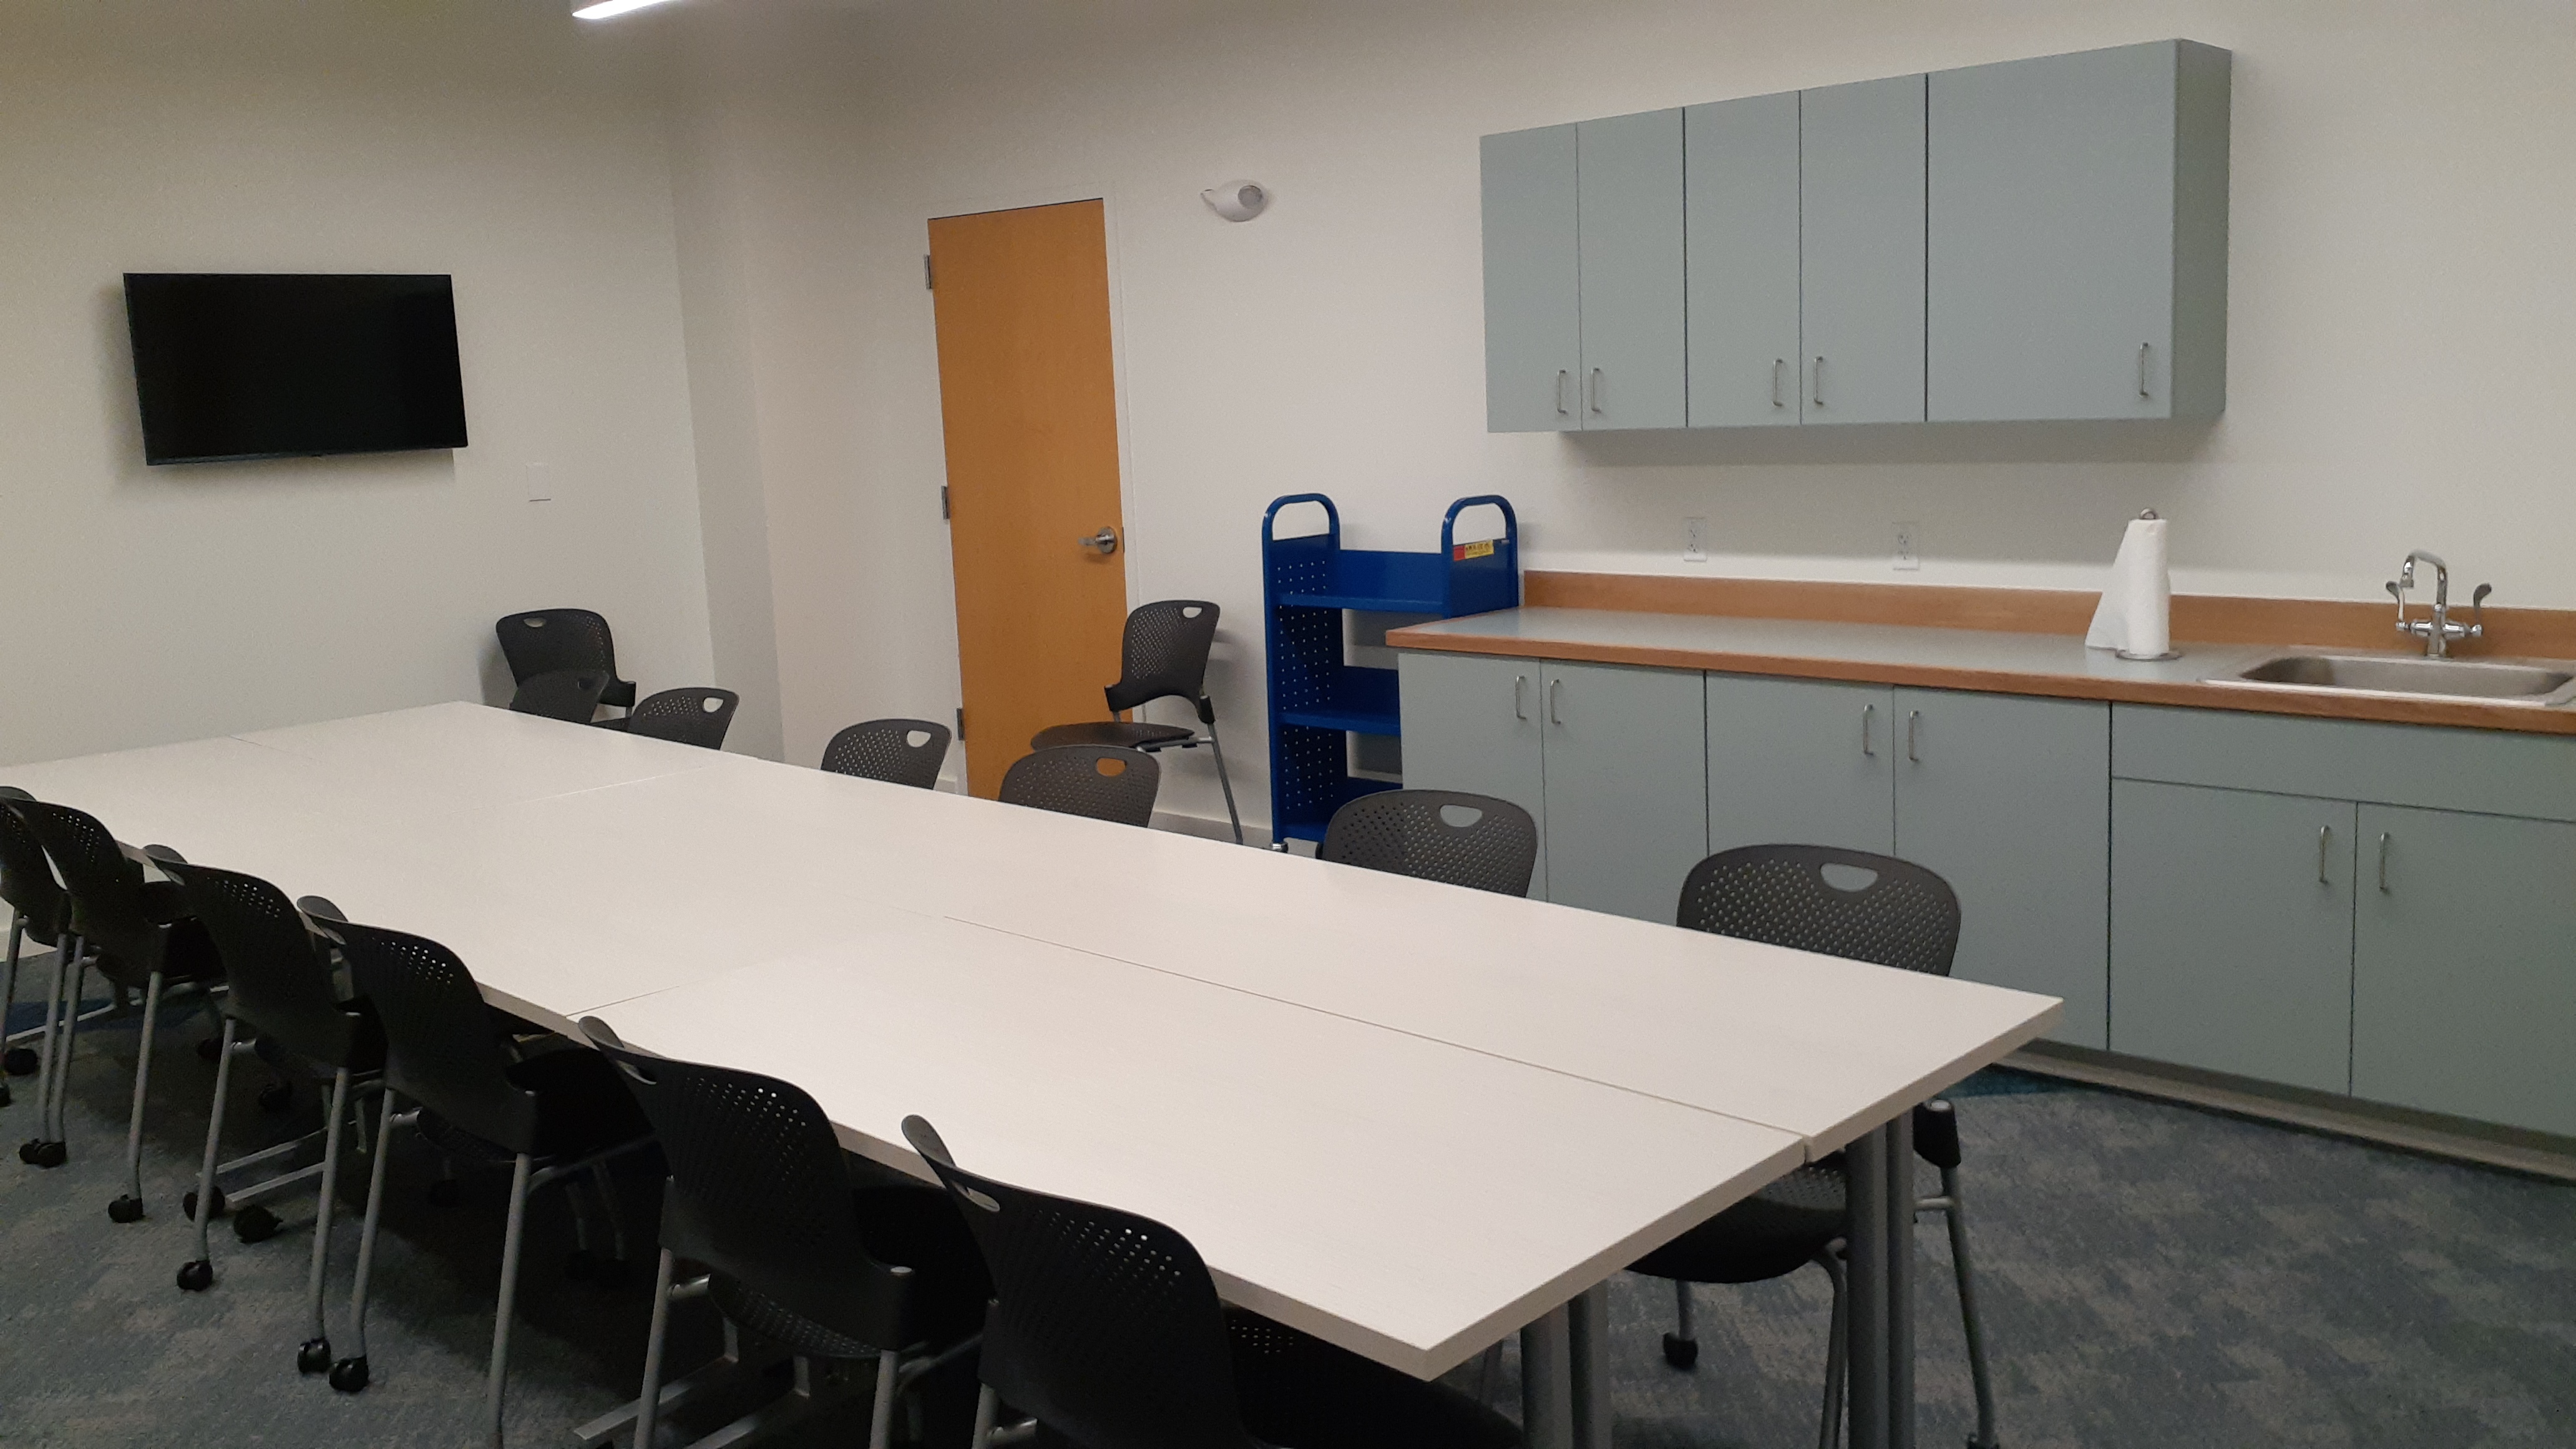 Image of the makerspace including a large conference-style table with twelve chairs, wall-mounted television, cabinets, and sink space